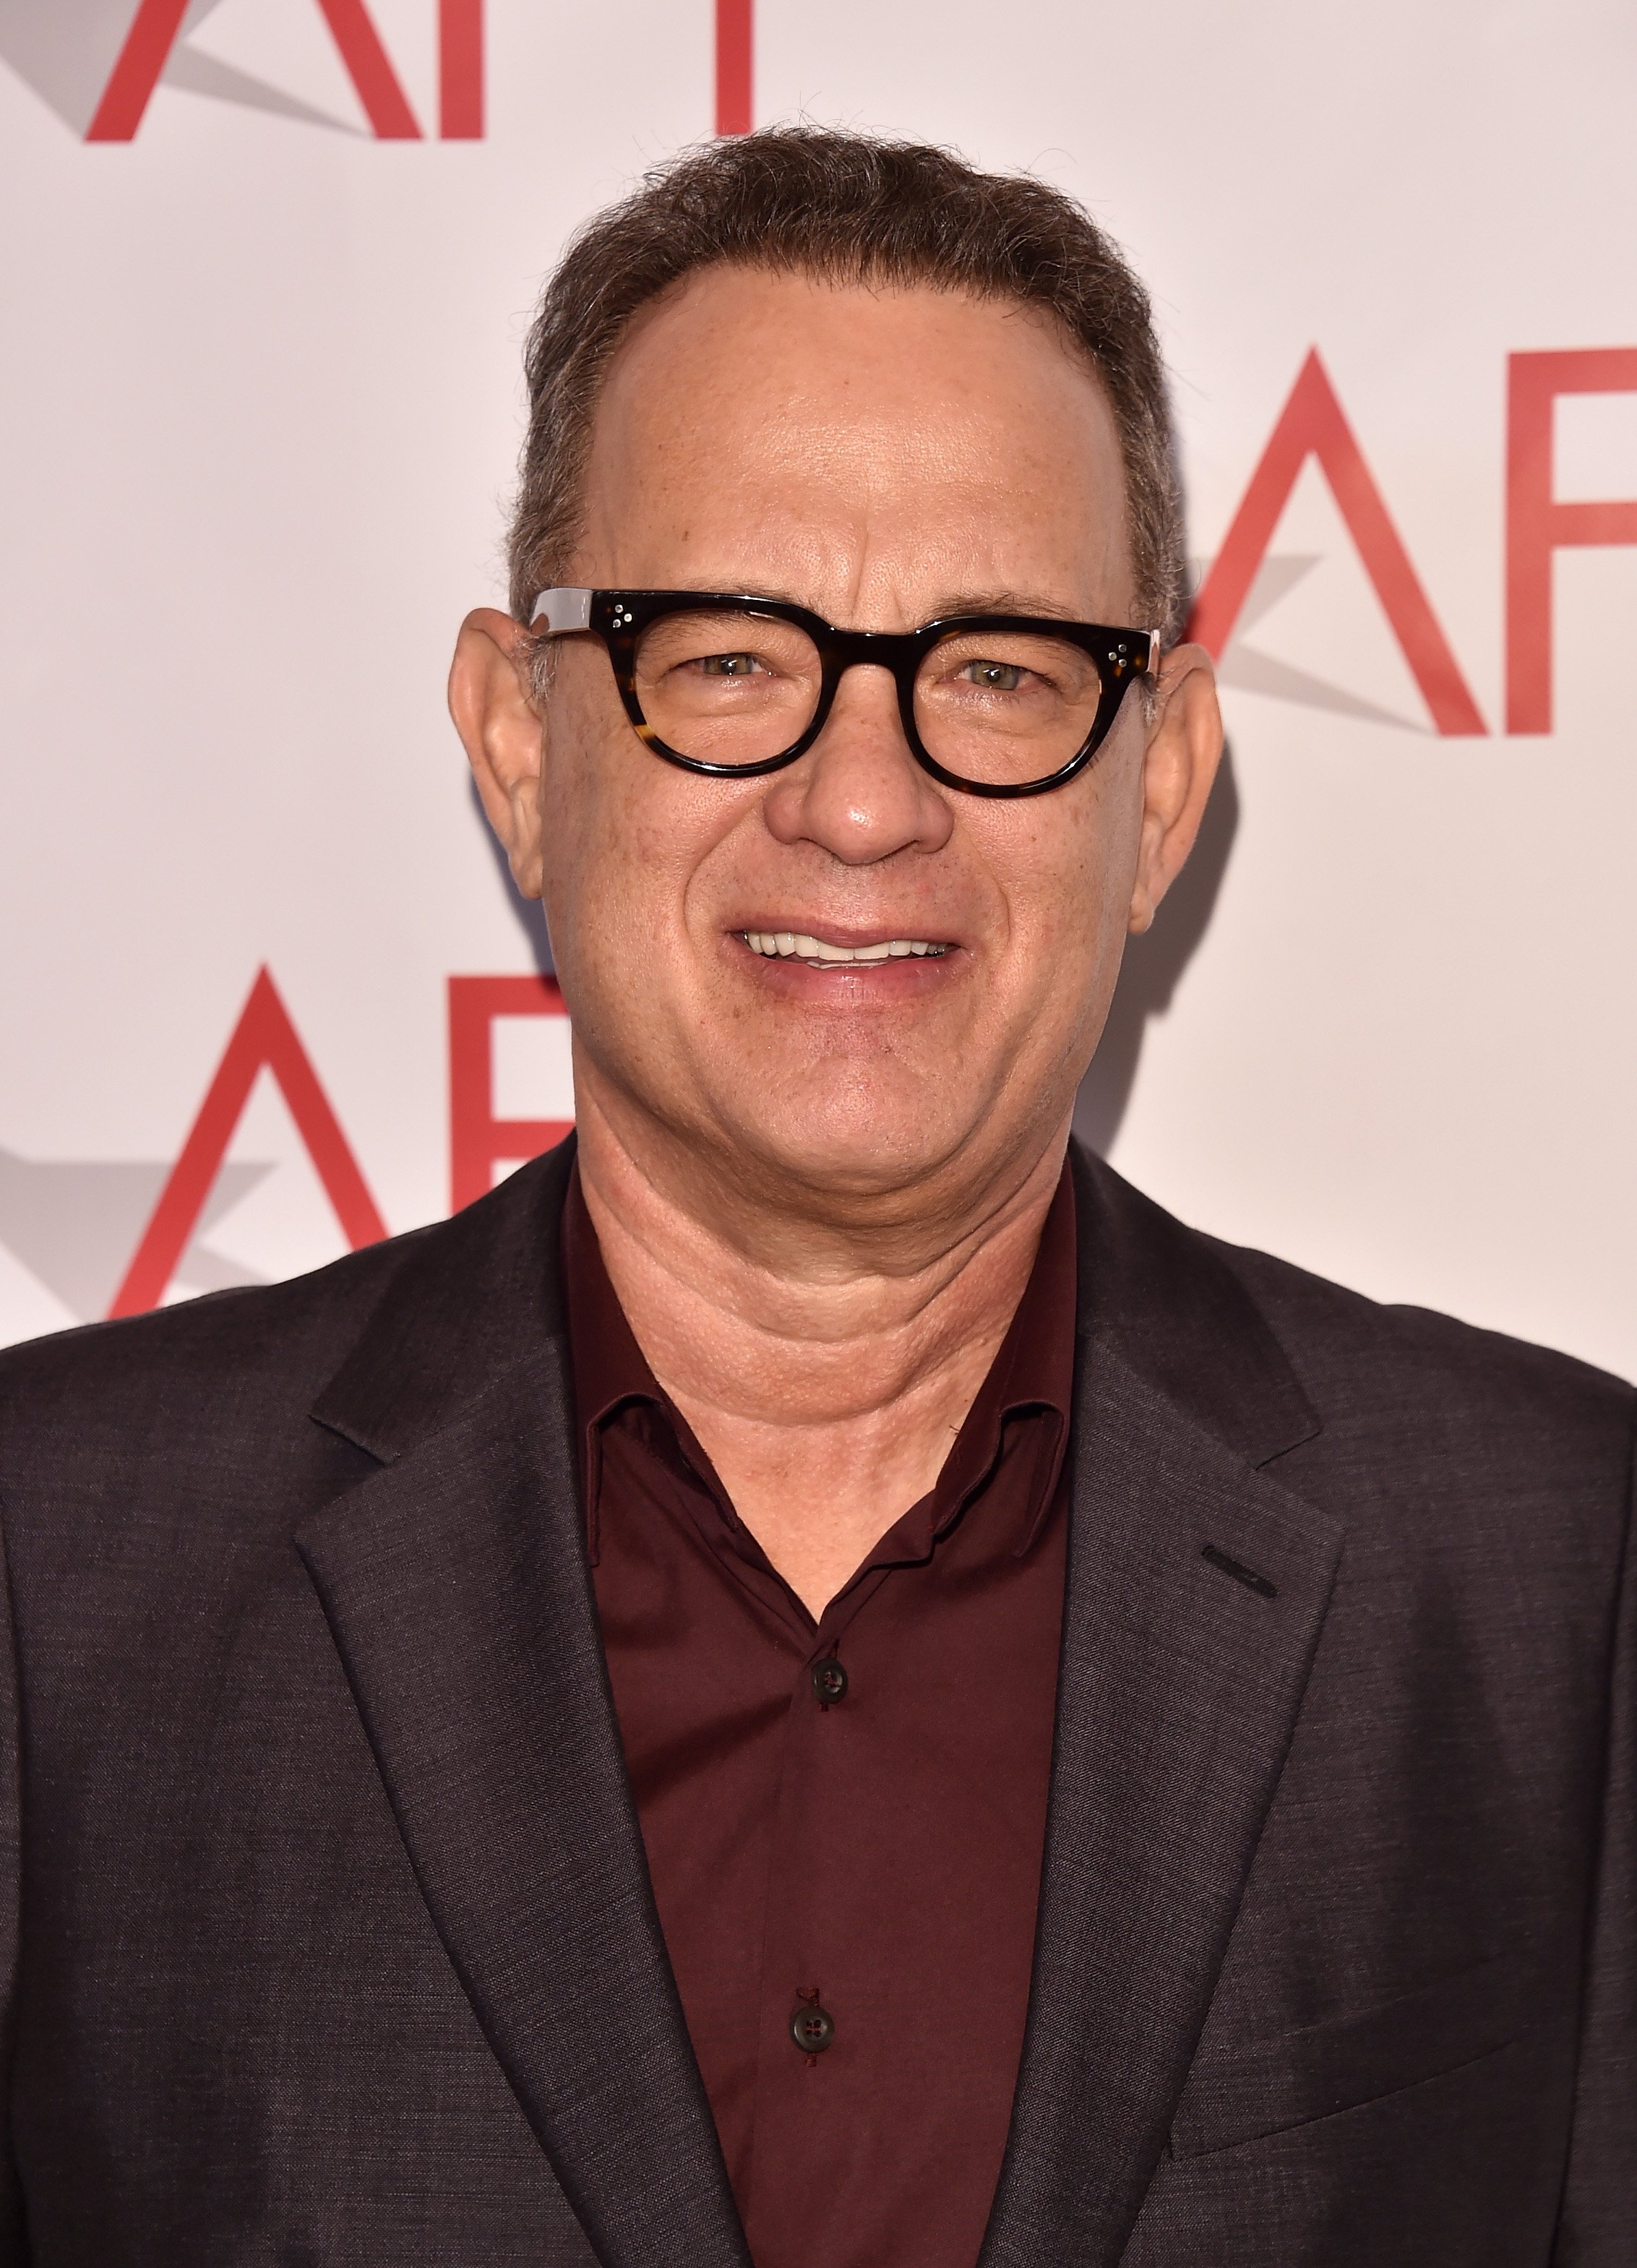 Tom Hanks during the 18th Annual AFI Awards. | Source: Getty Images